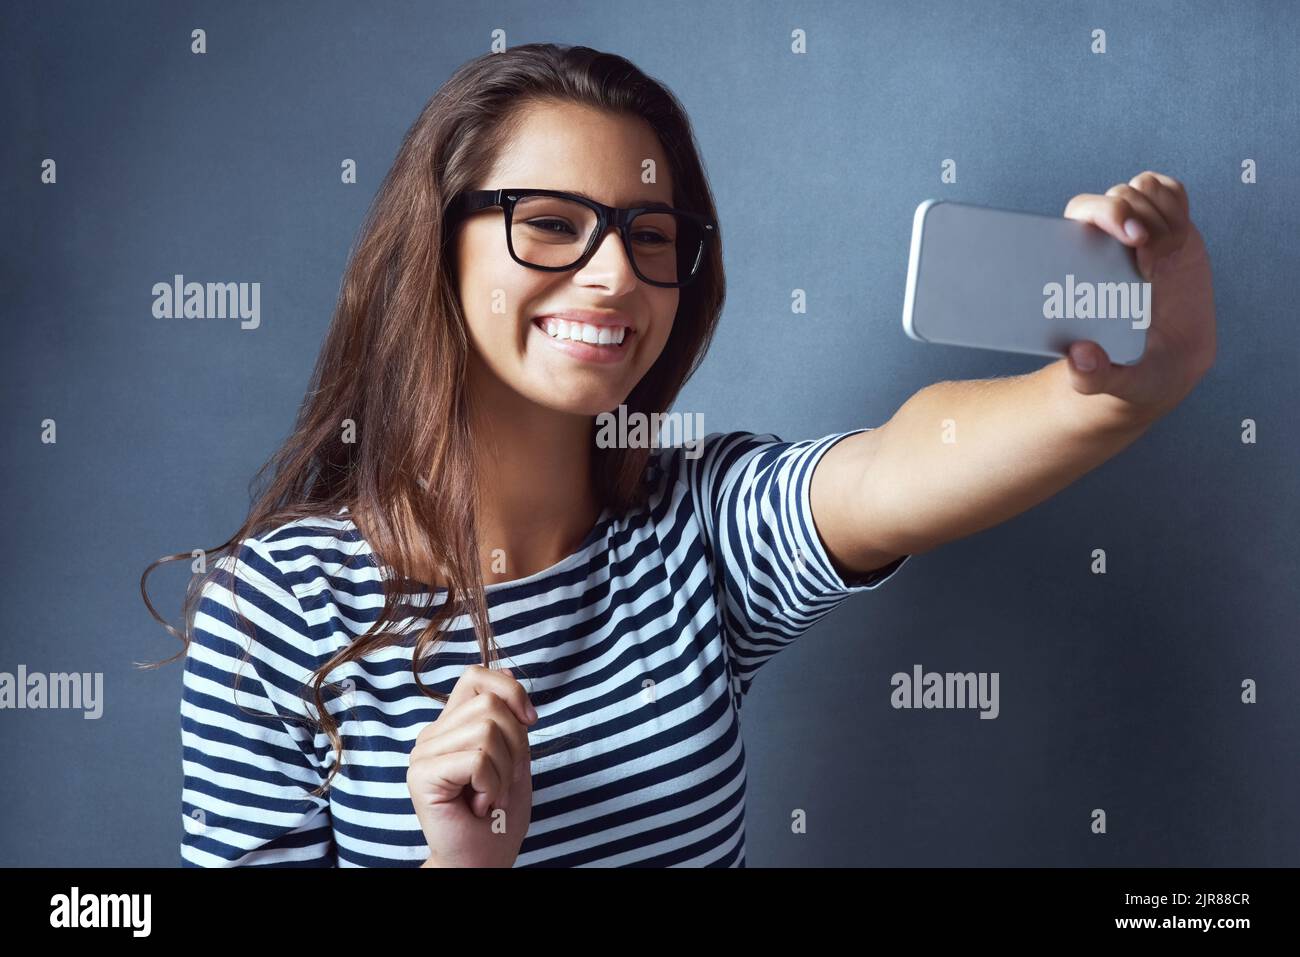 But first, lemme take a selfie. Studio shot of an attractive young woman taking a selfie against a dark background. Stock Photo